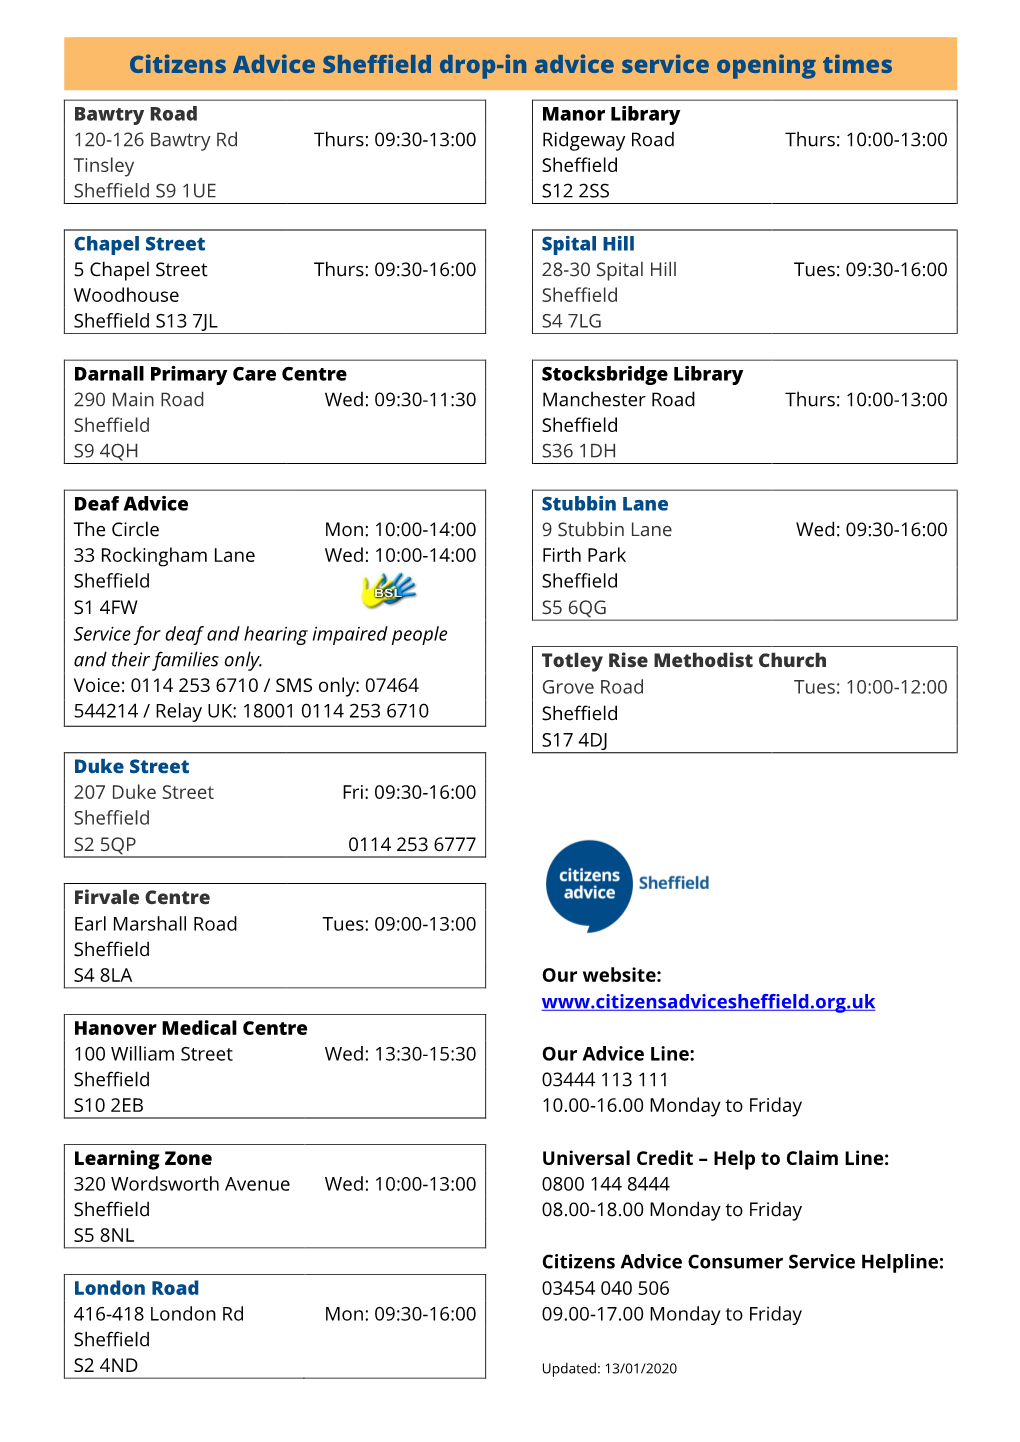 Citizens Advice Sheffield Drop-In Advice Service Opening Times